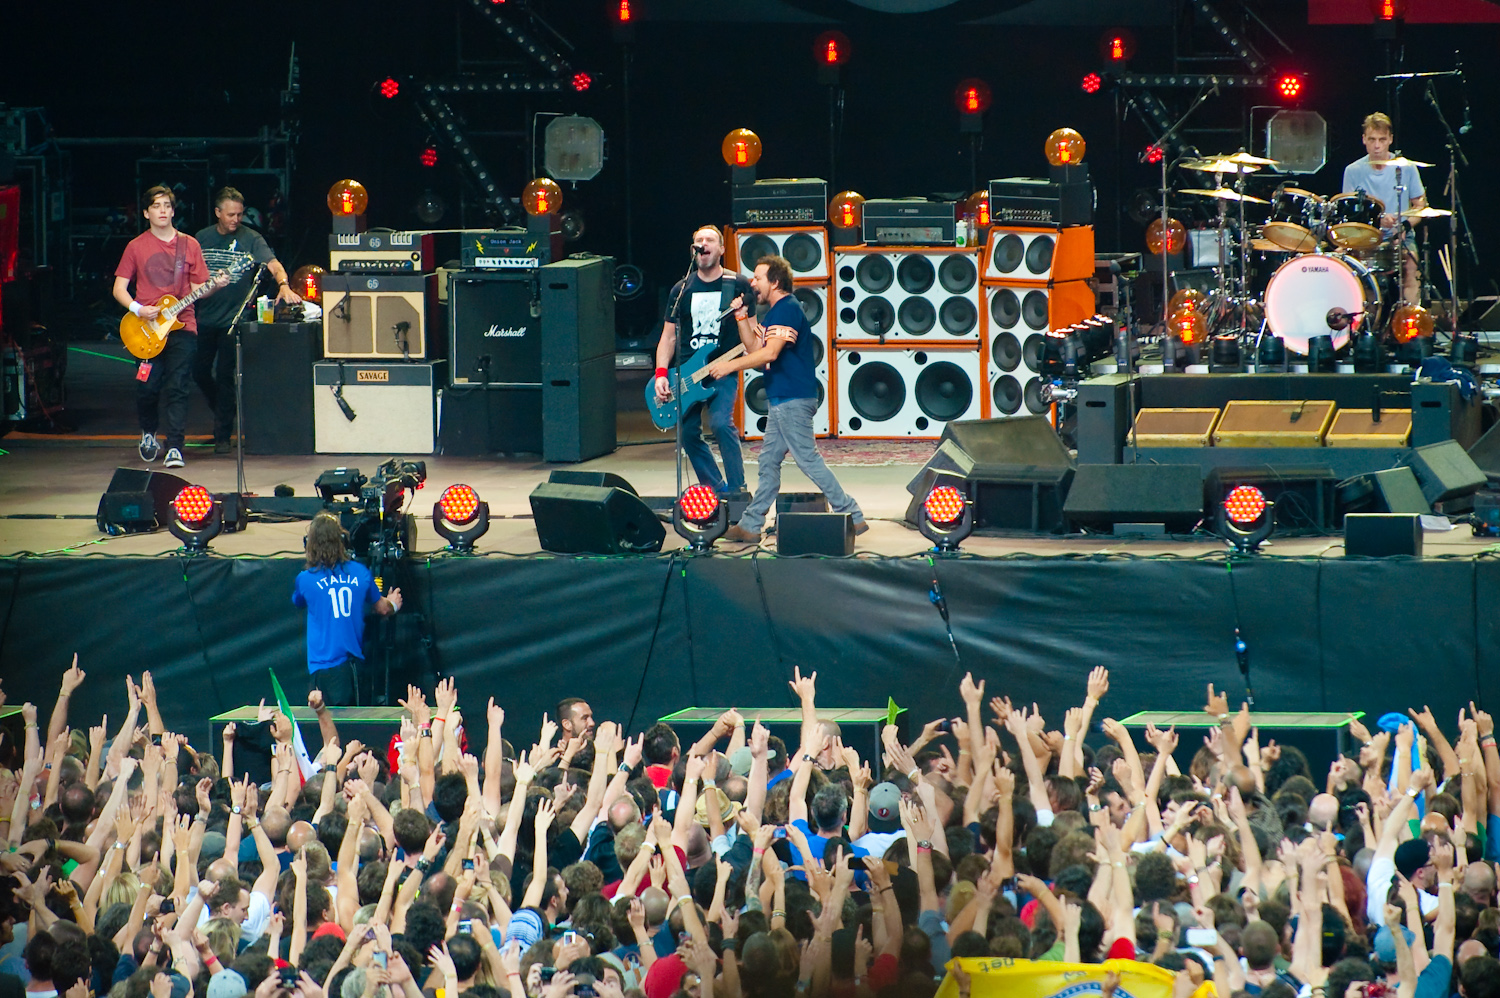 Pearl Jam performing live on stage